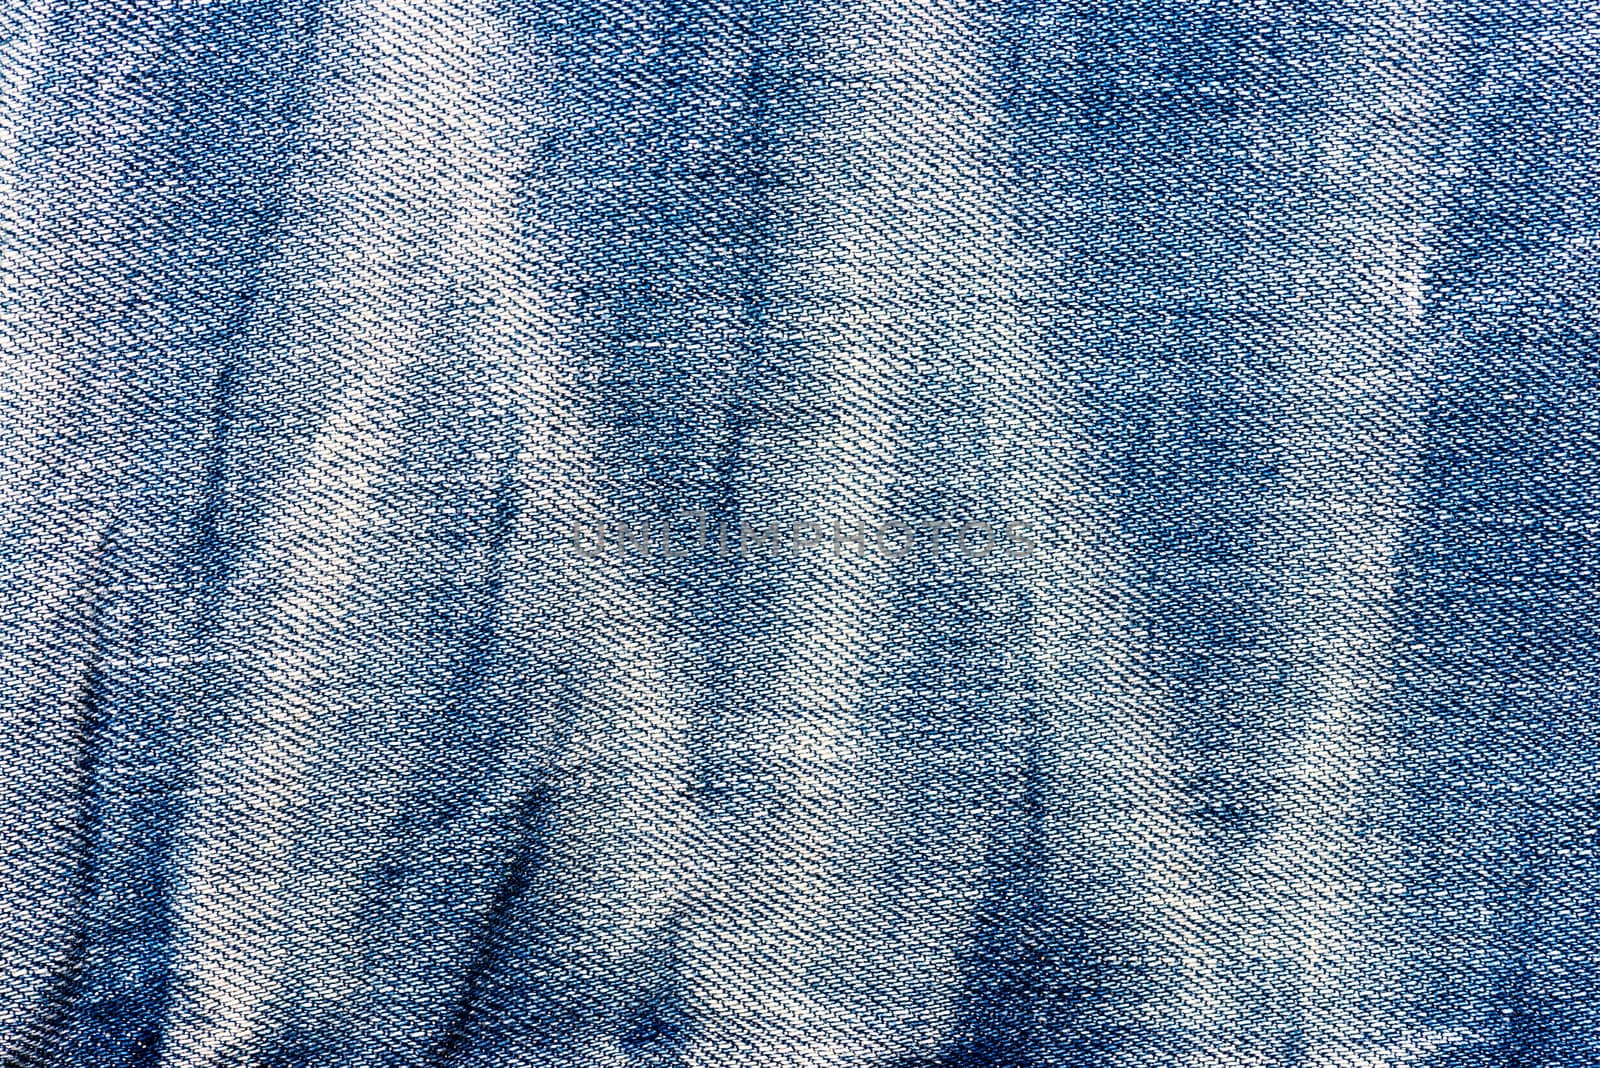 blue jeans texture for any background by DNKSTUDIO